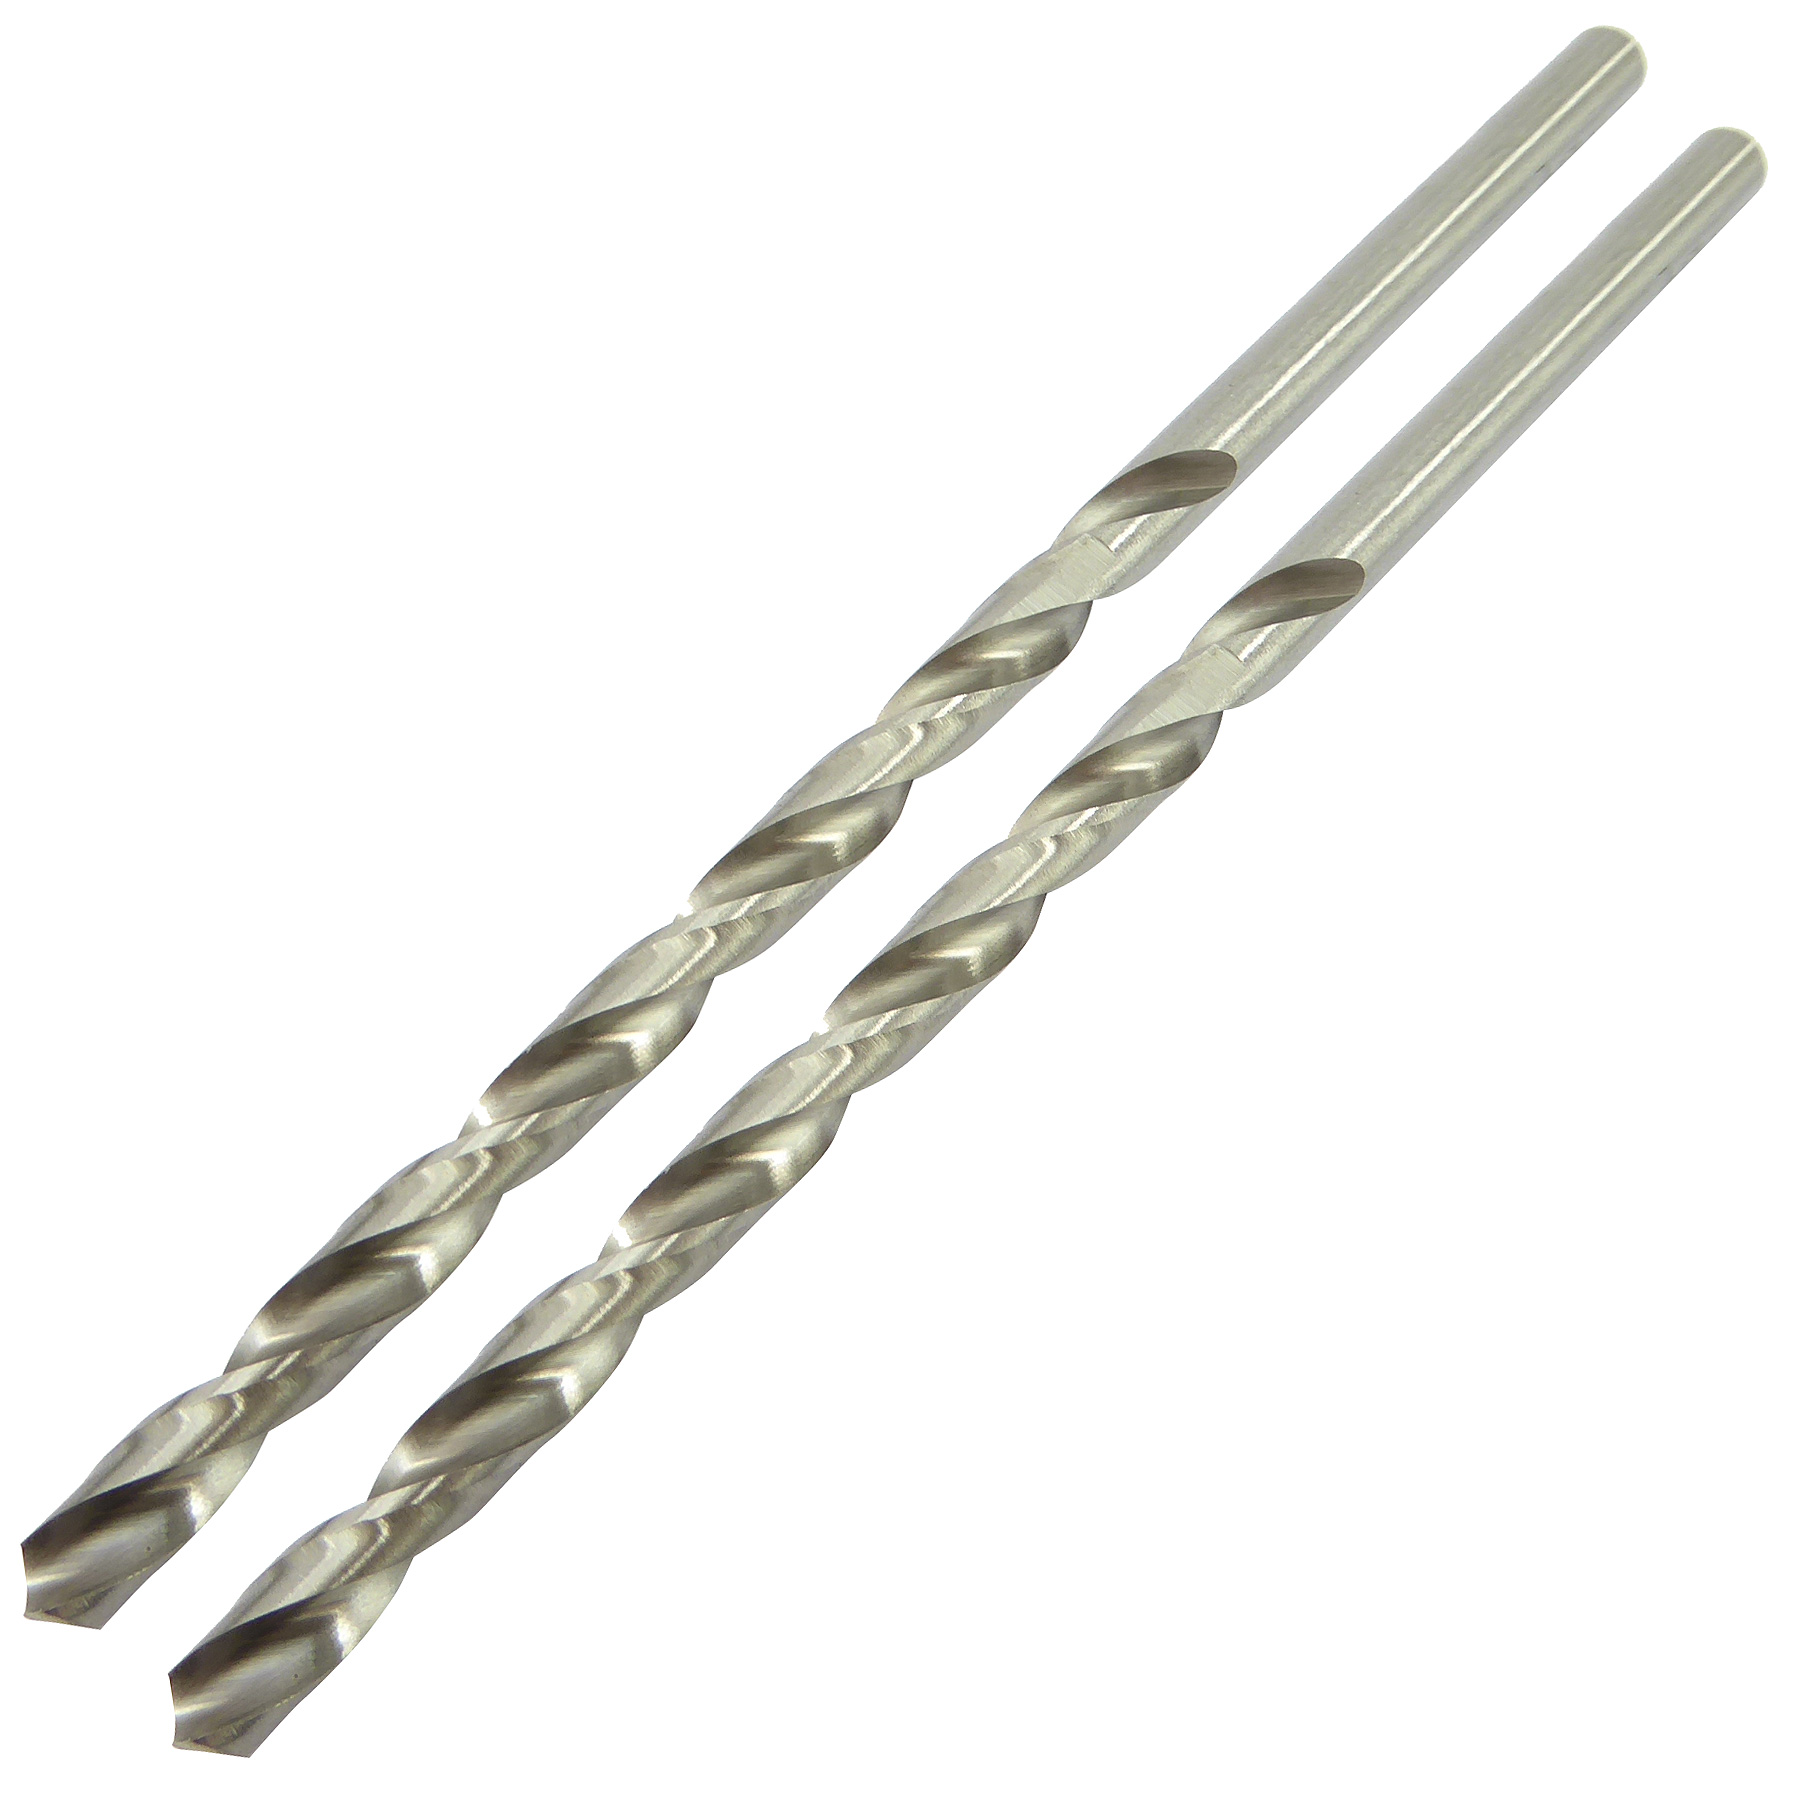 6.0mm x 139mm Long Series Ground Twist Drill Pack of 2